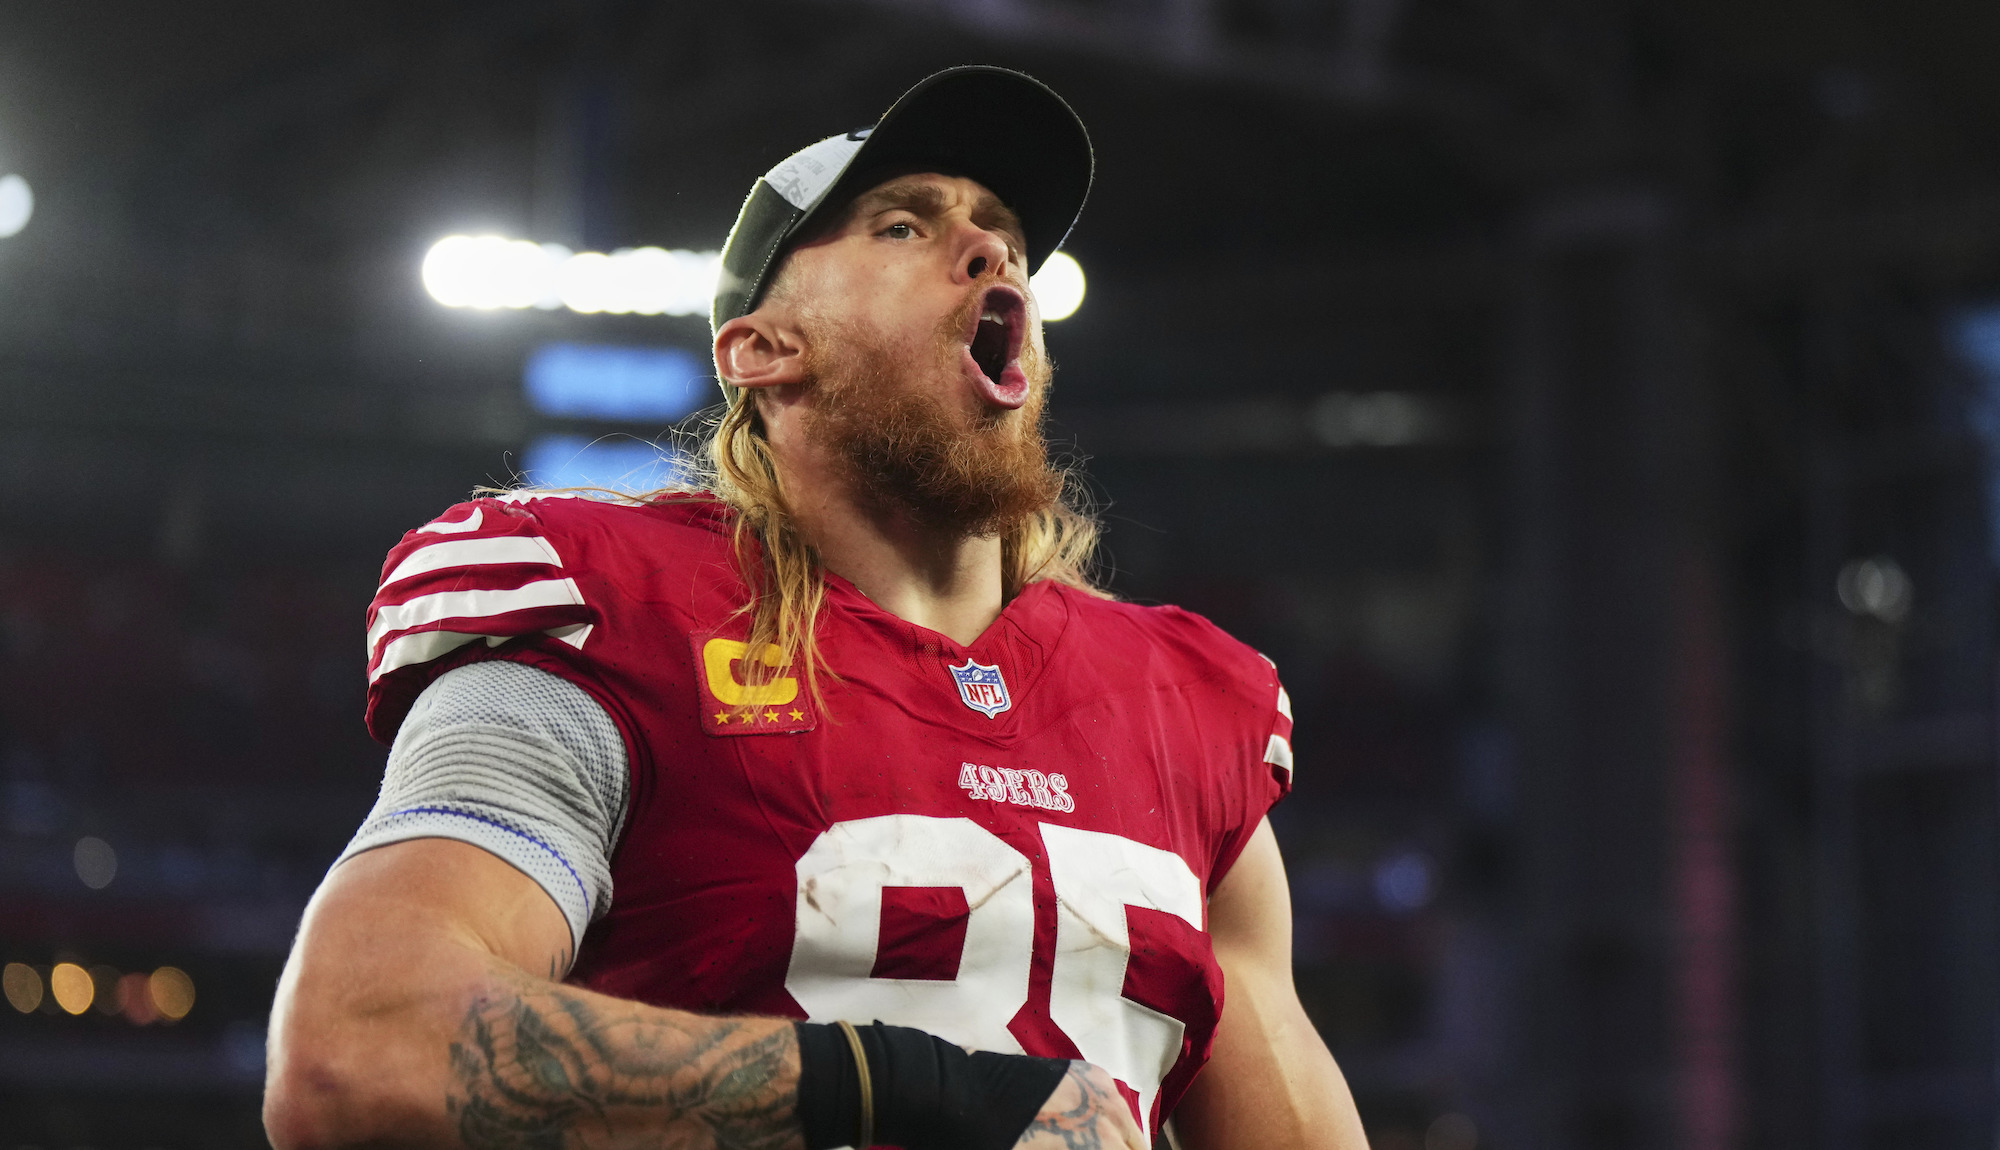 george kittle says 49ers players celebrated cowboys loss while checking scores during game vs. cardinals